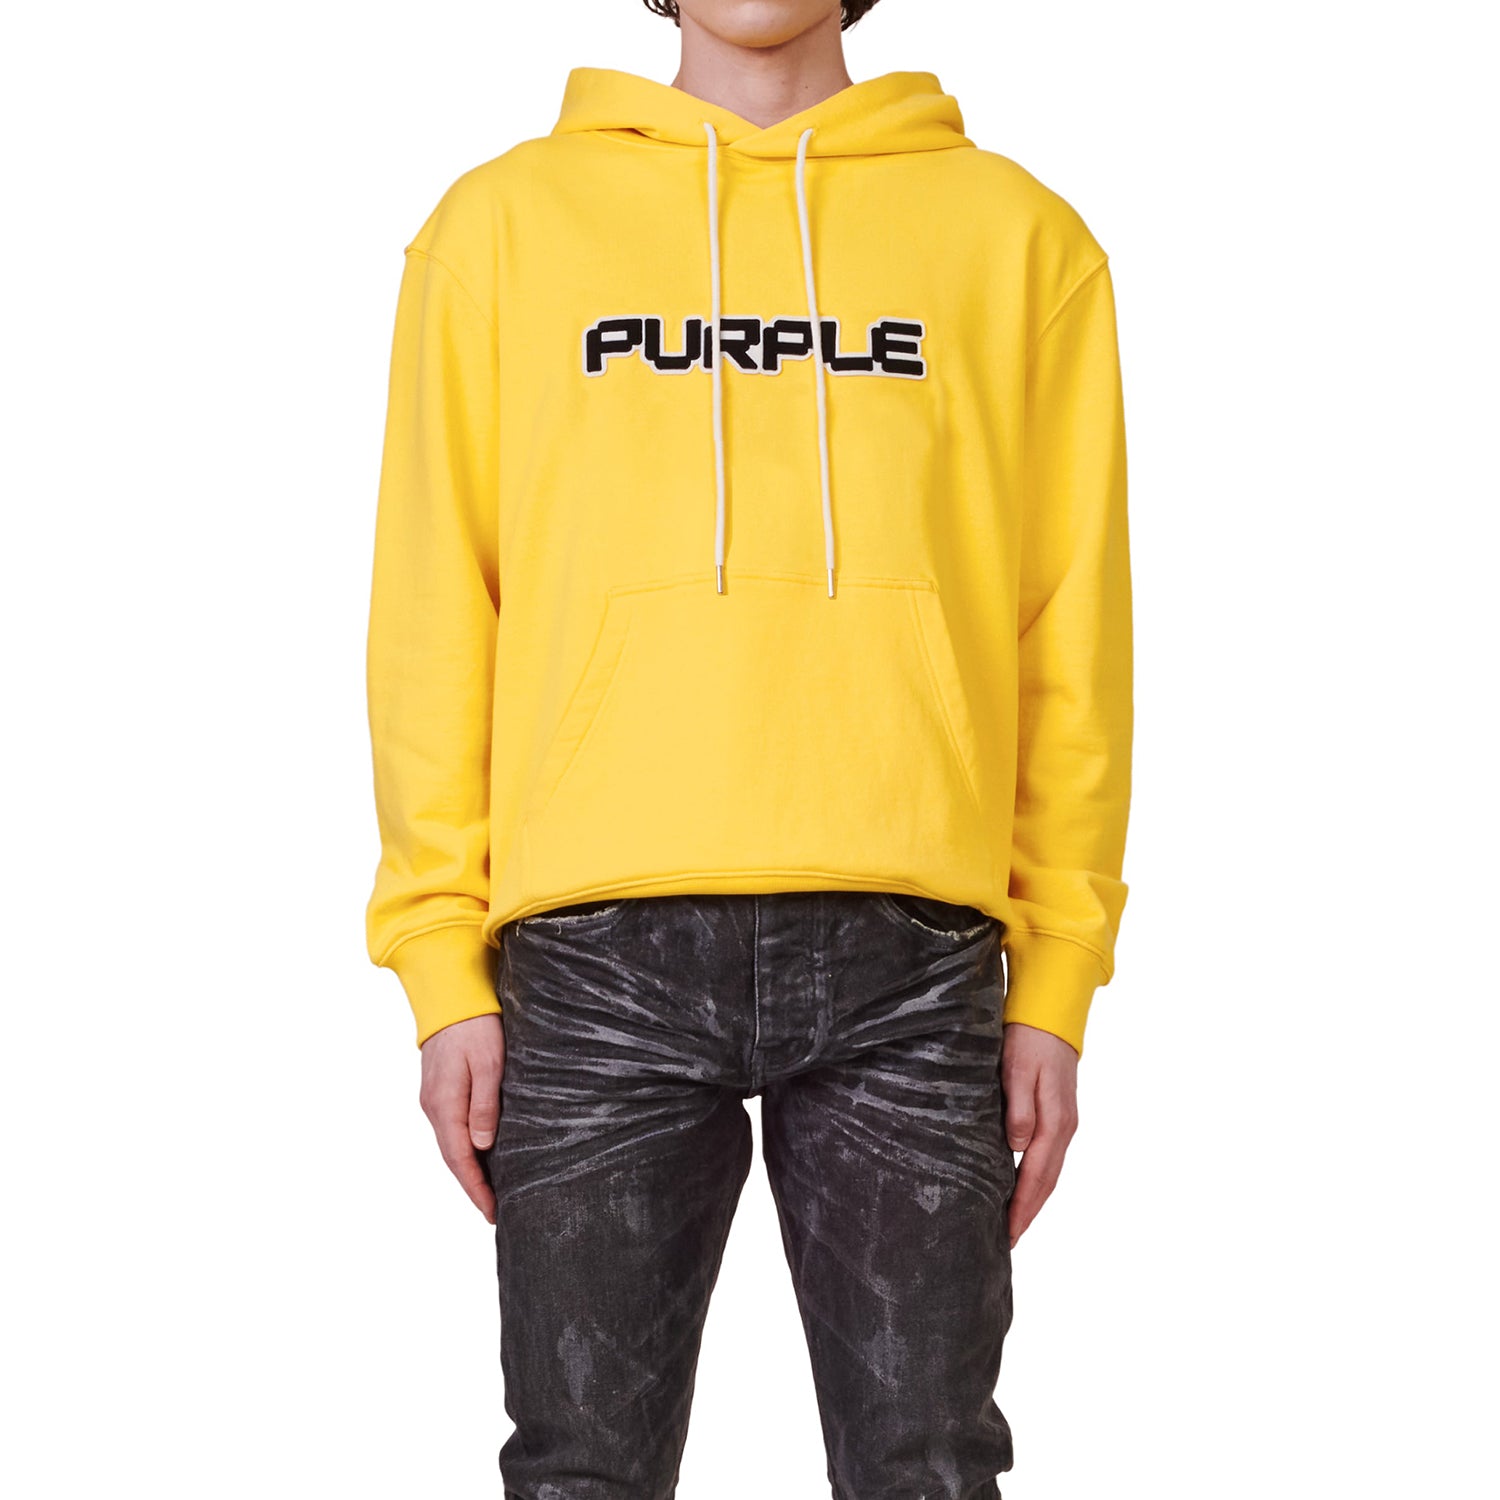 Purple-brand French Terry Pullover Hoody-Wordmark Mens Style : P410-fcyg322